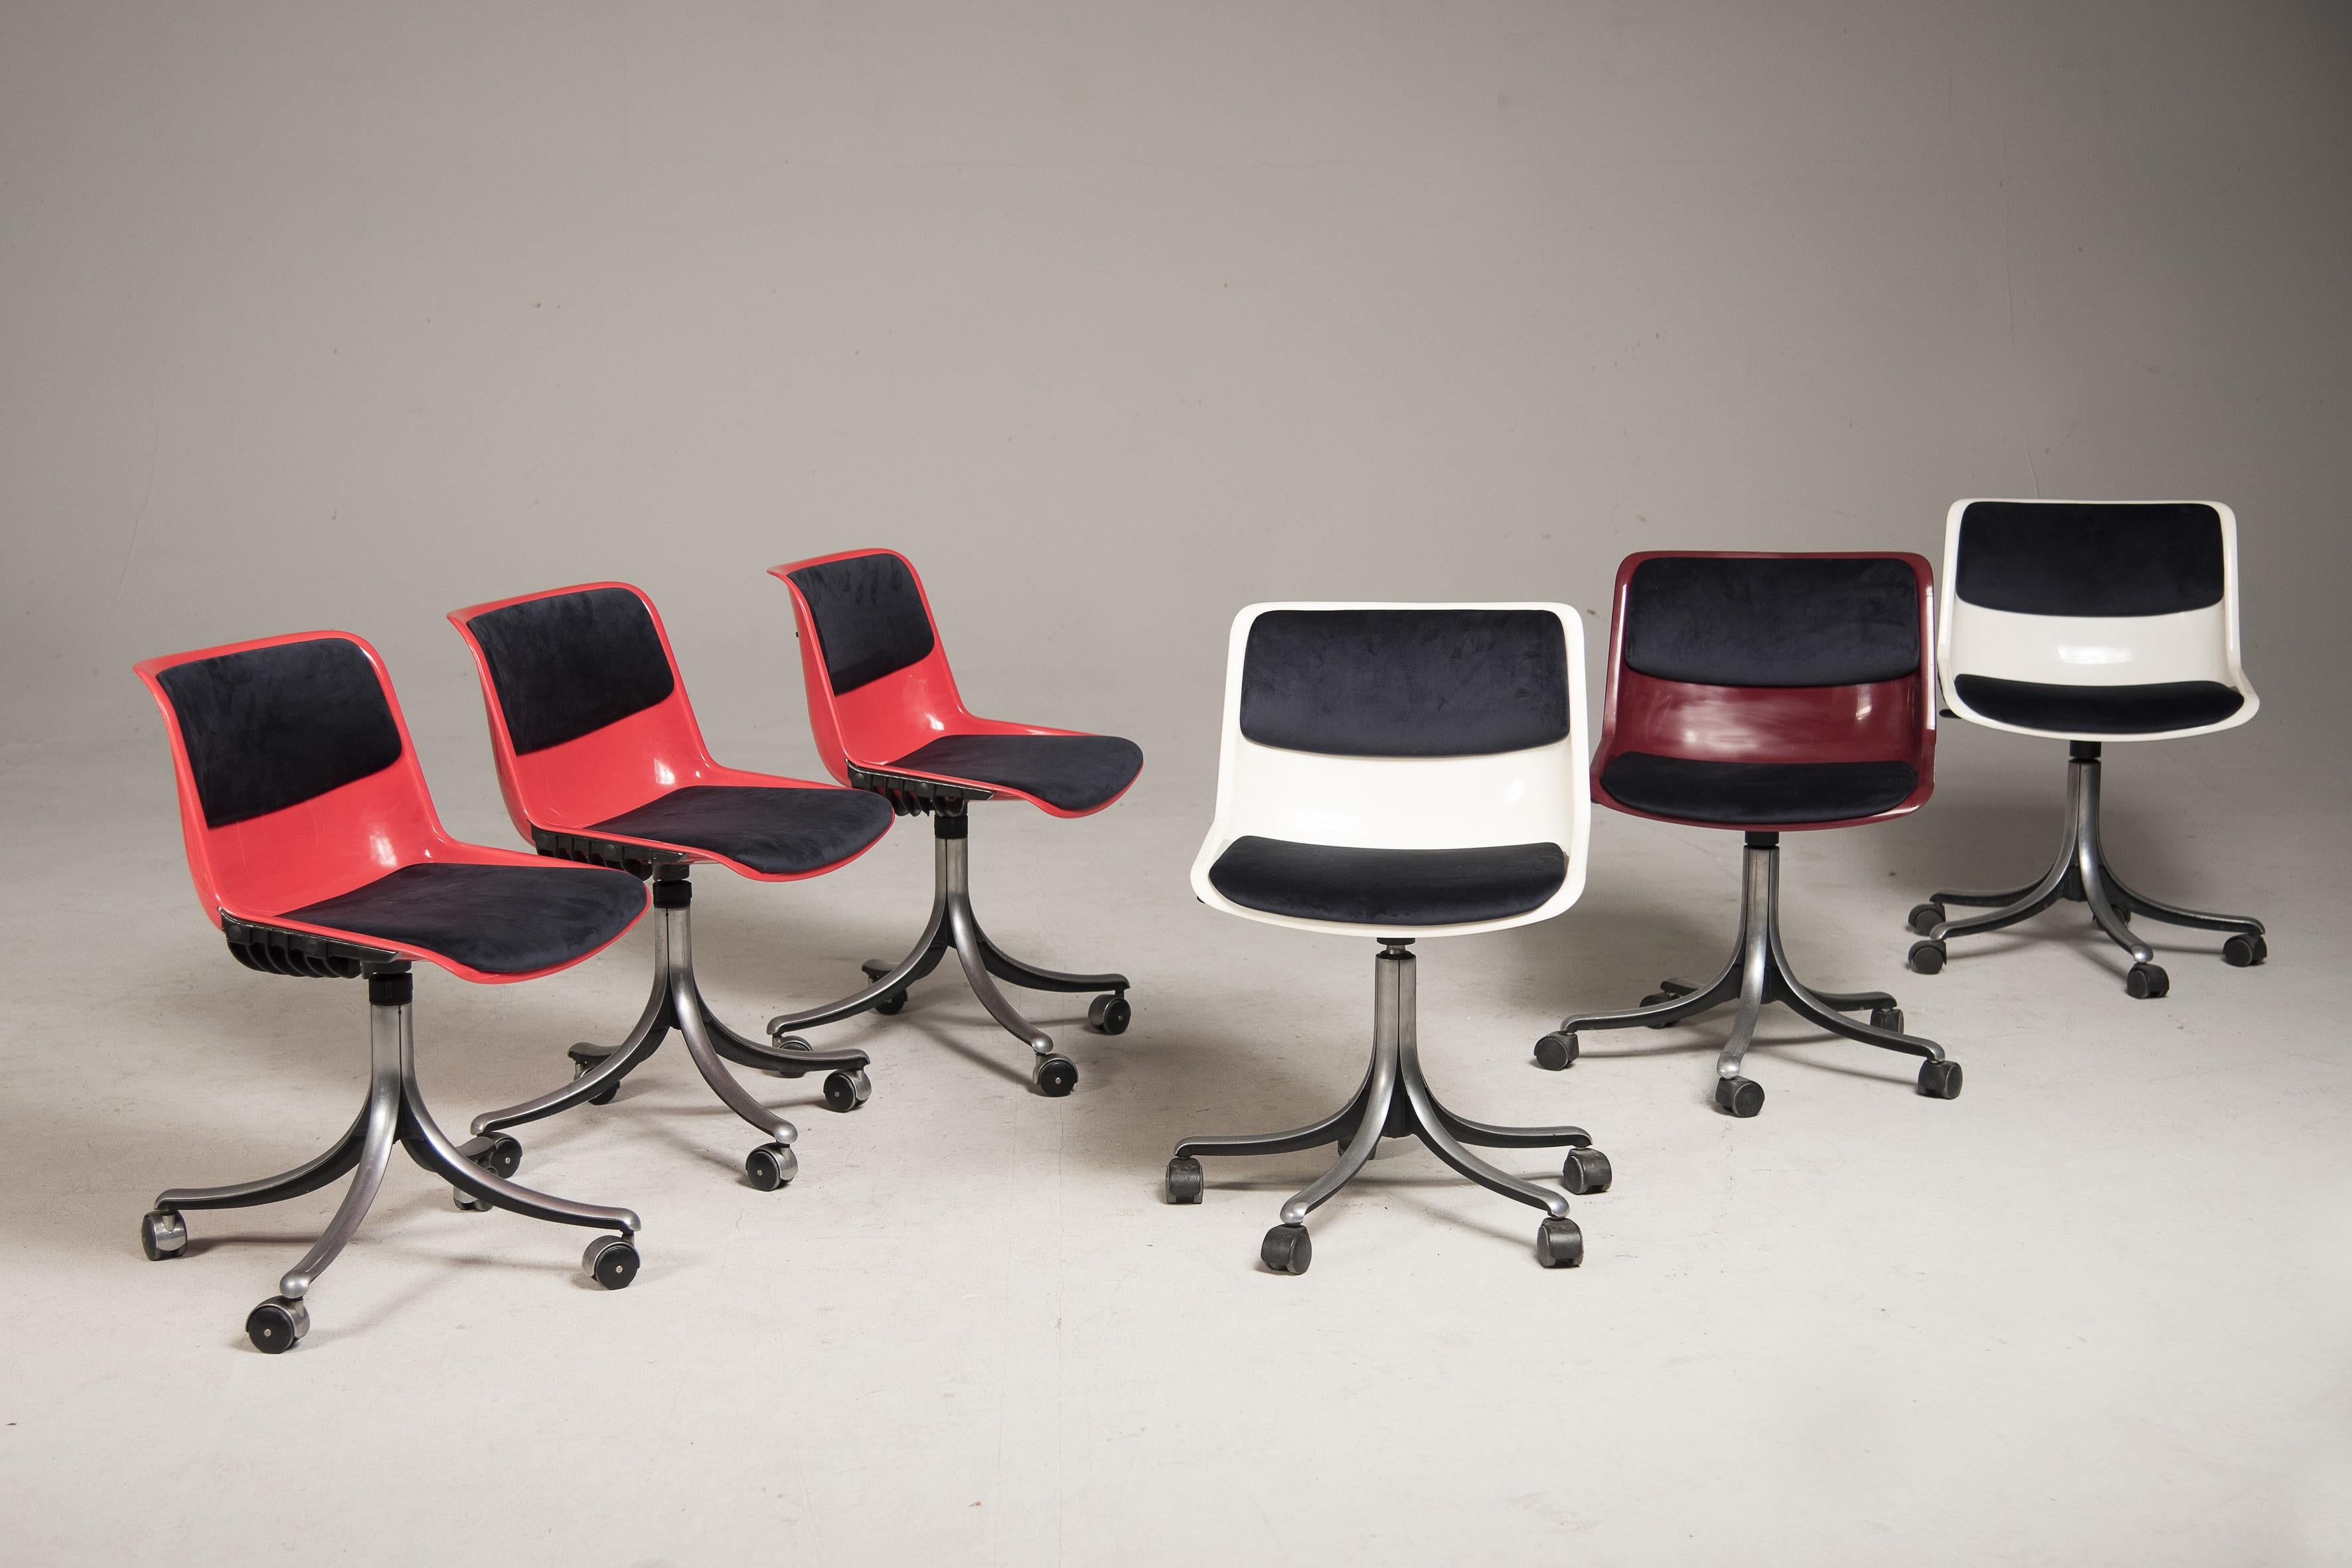 Six office swivel wheeled chairs by Osvaldo Borsani for Tecno, made in Italy in 1980s. Stamped on the bottom and marked Tecno on the side, made of red, white and wine color plastic. The base is 5-star metal. Chairs are all original and in good